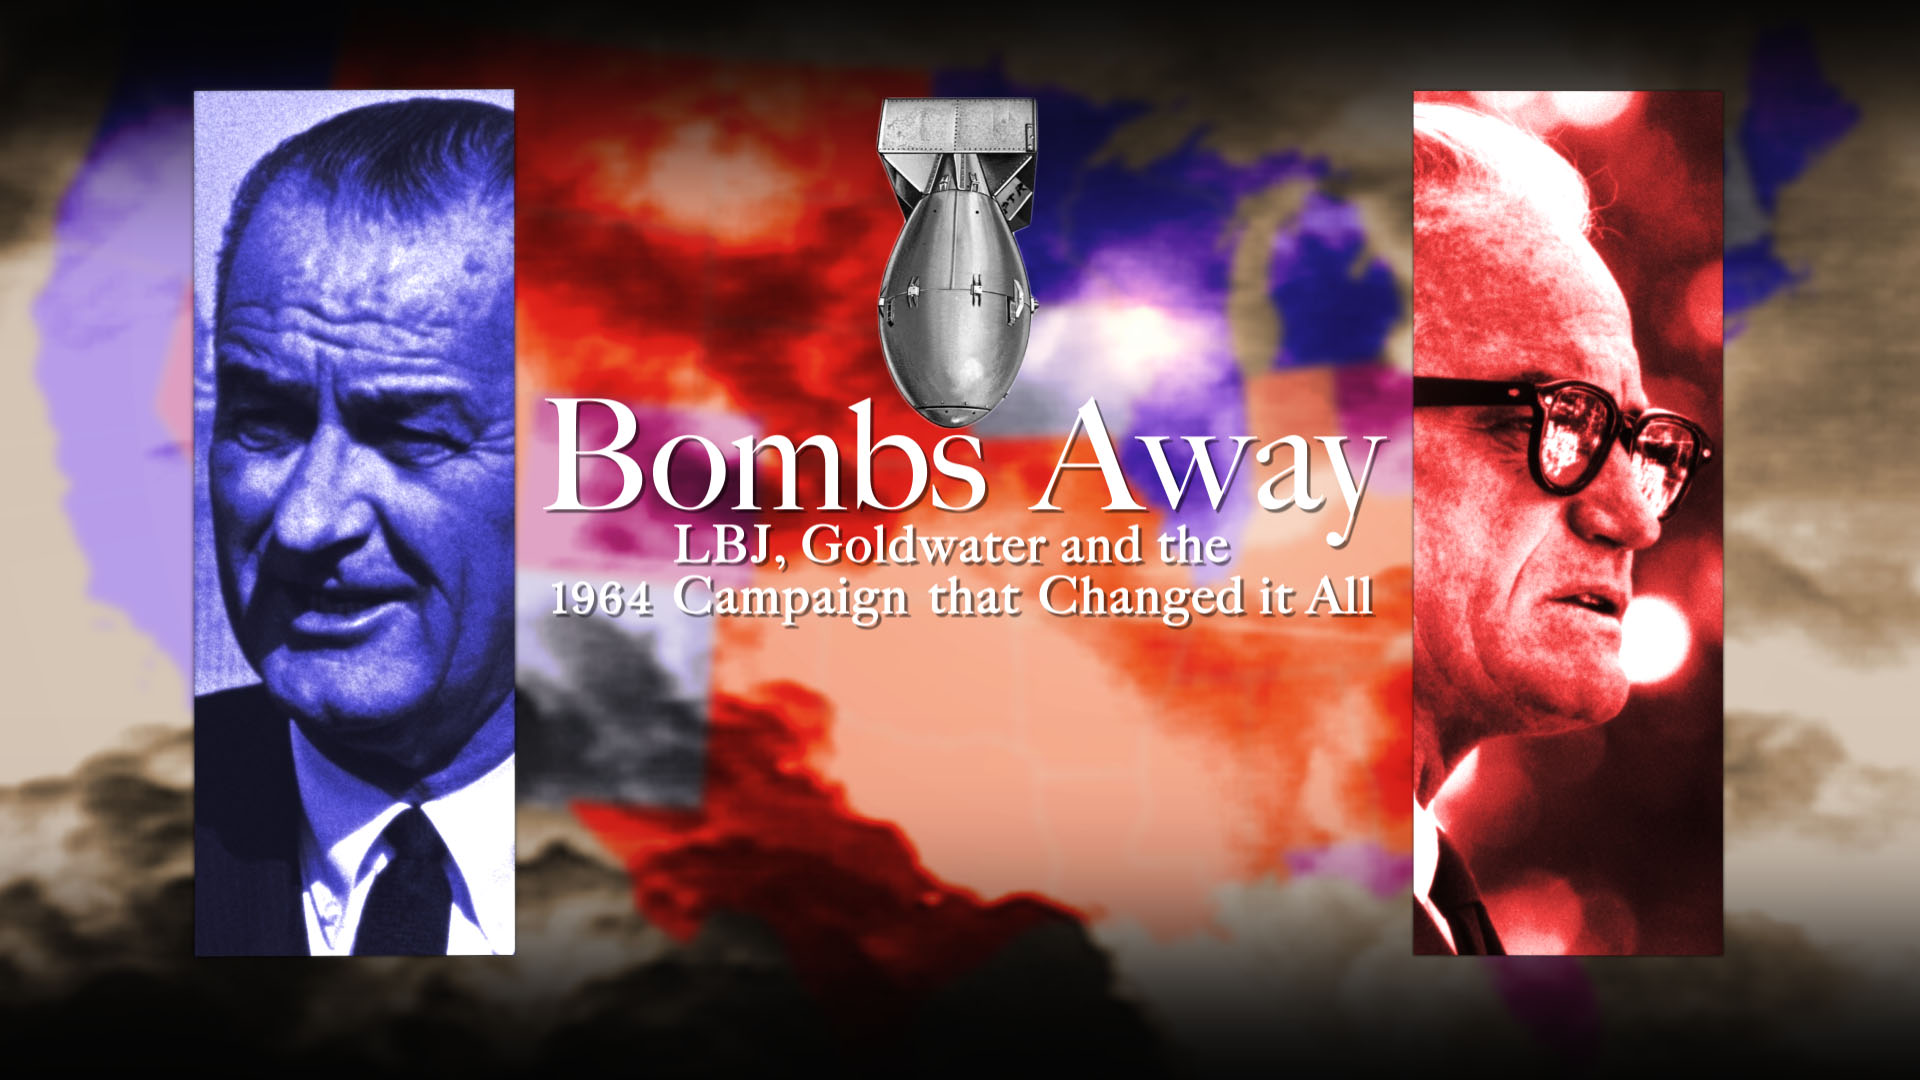 Lyndon Johnson and Goldwater headshots with the text: Bombs Away.  LBJ, Goldwater and the 1964 Campaign that Changed it all